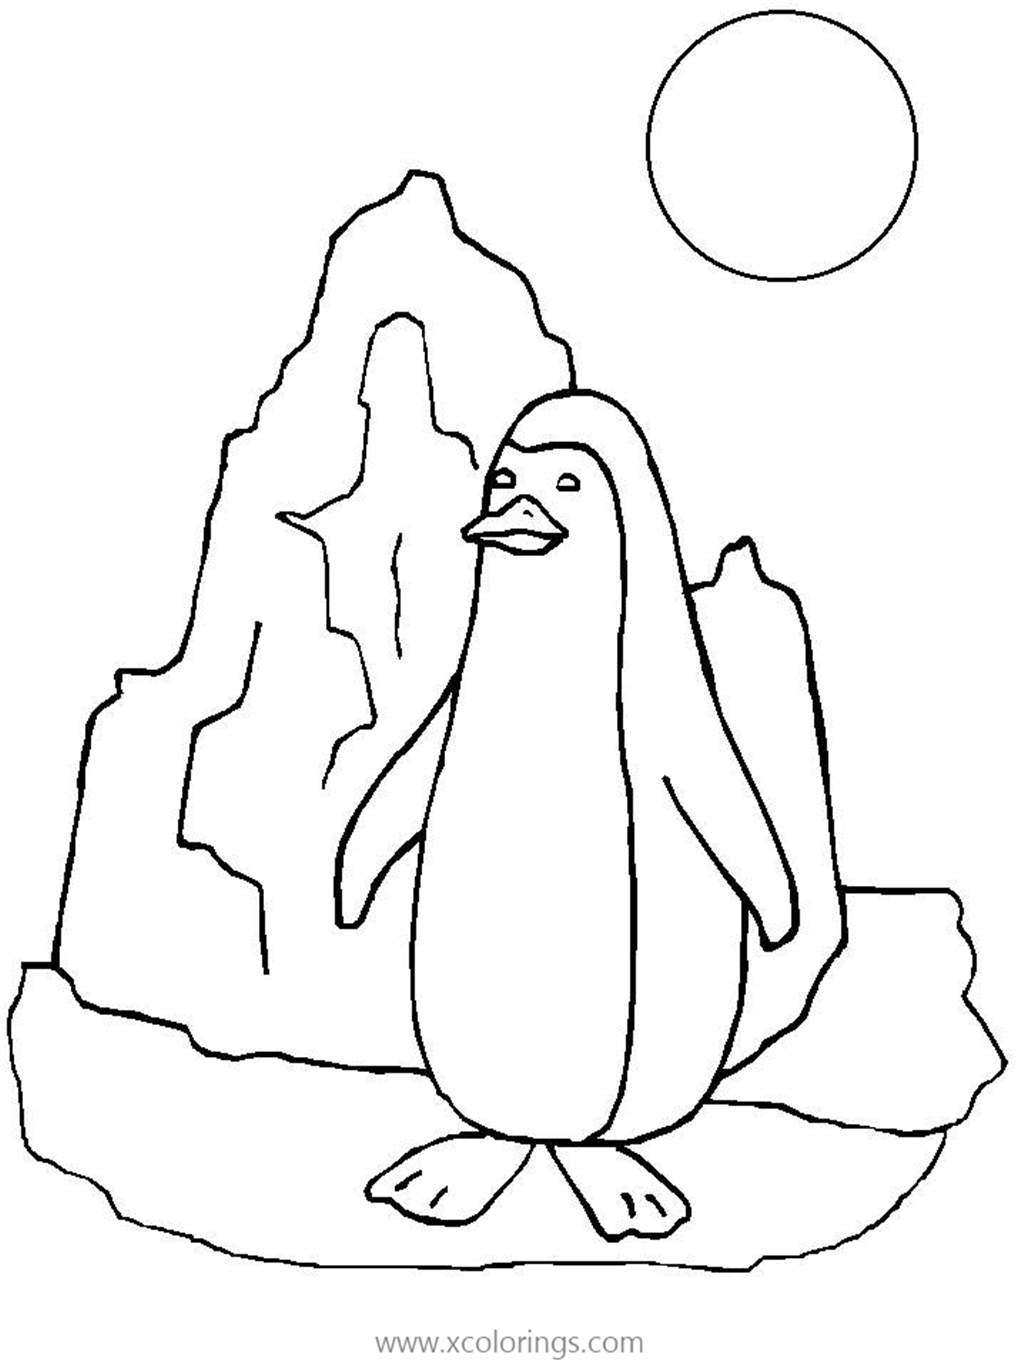 Free Penguin and Sun Coloring Pages printable